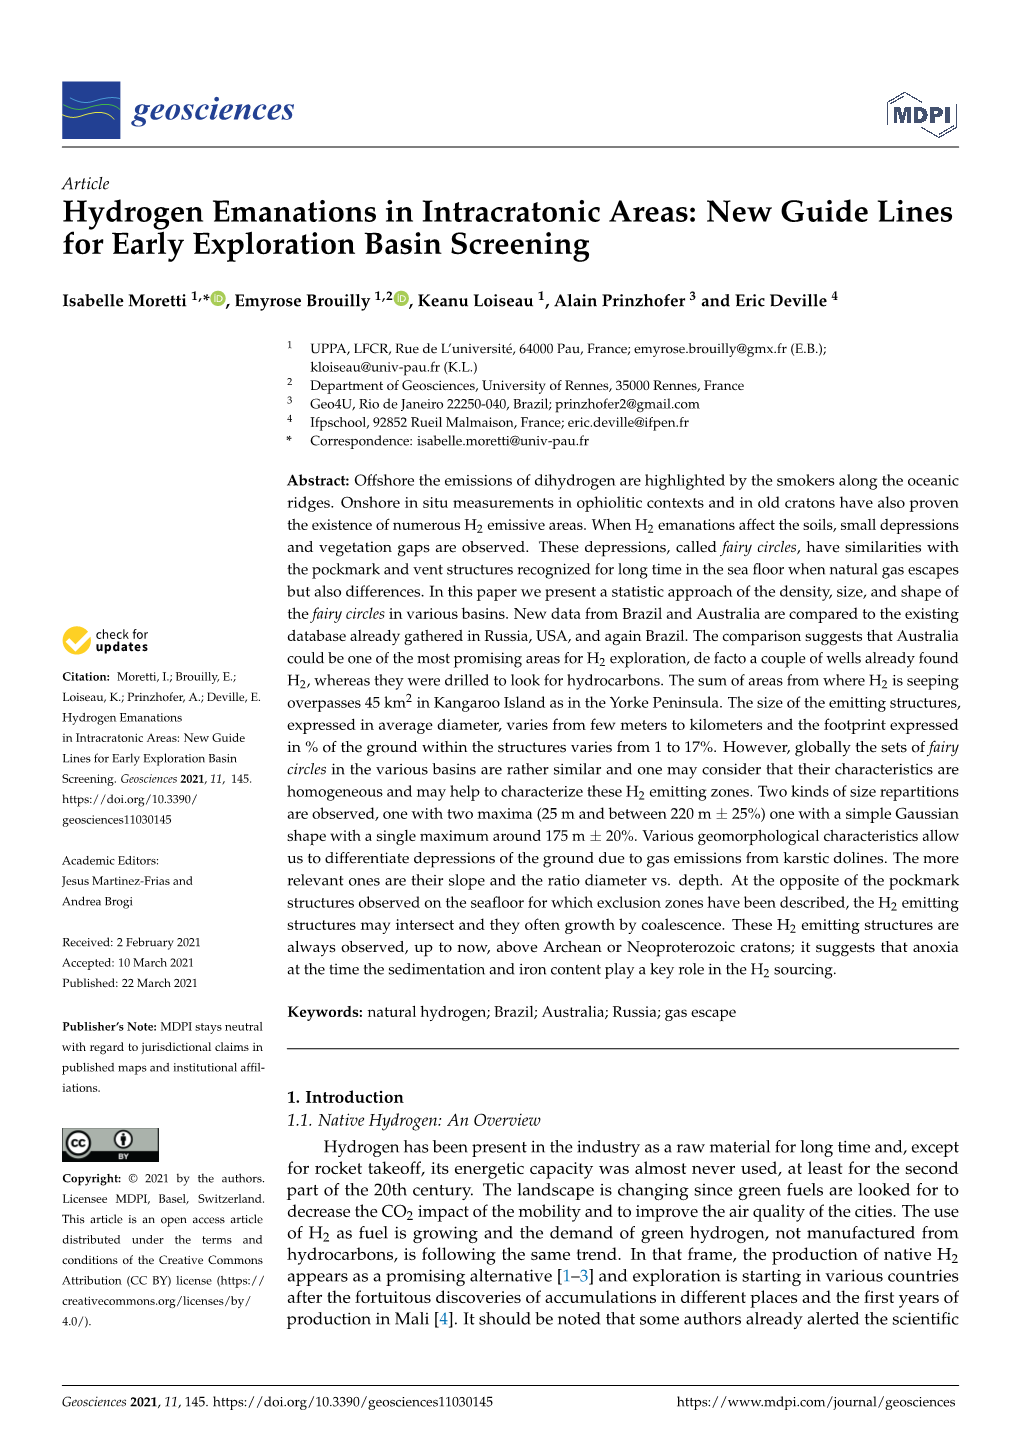 Hydrogen Emanations in Intracratonic Areas: New Guide Lines for Early Exploration Basin Screening